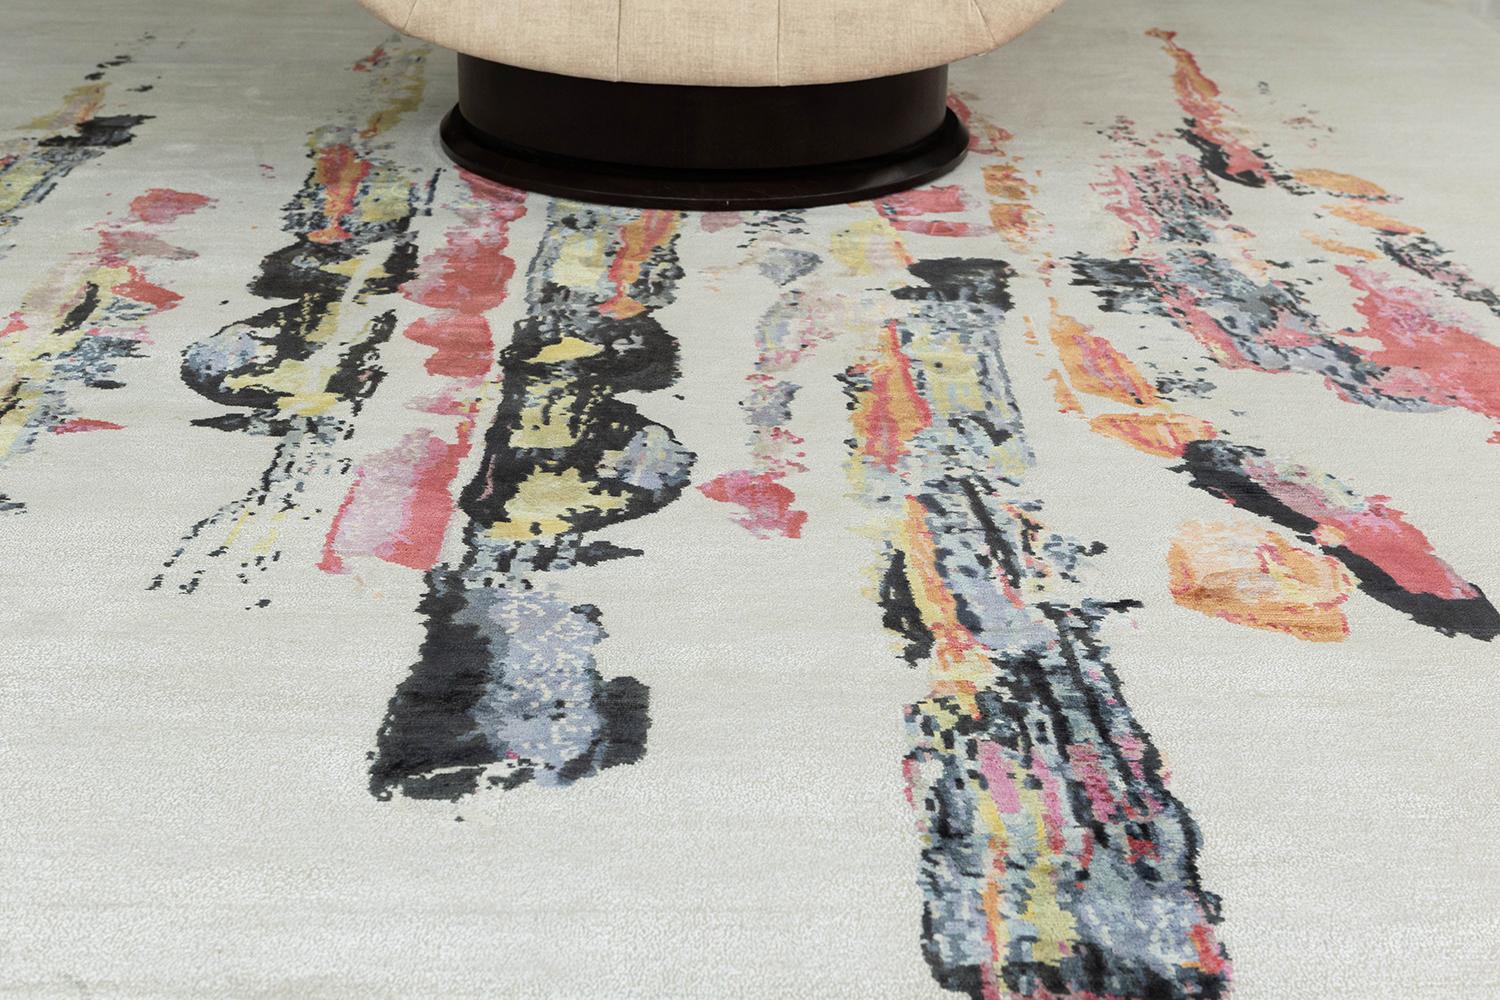 The Bisous collection by FORM Design Studio

The eight carpets in the collection are inspired by the ways in which human beings express themselves: language, poetry, art, and architecture. Bisous is intended as a celebration--an exultation--shared